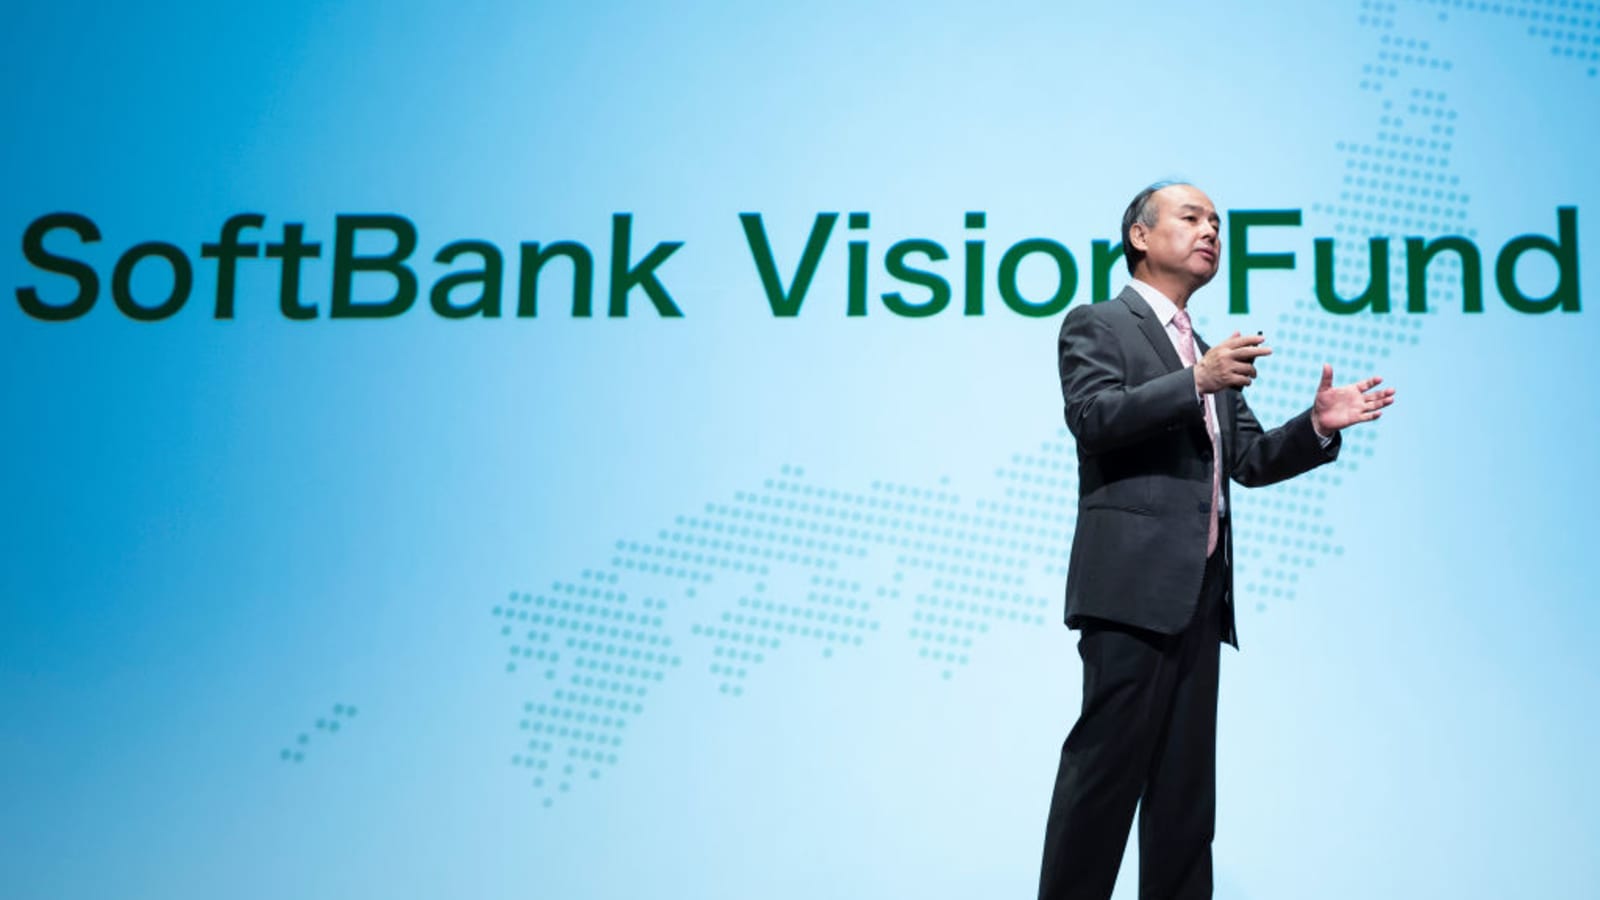 softbank strategy shifts from long-term domination to survival